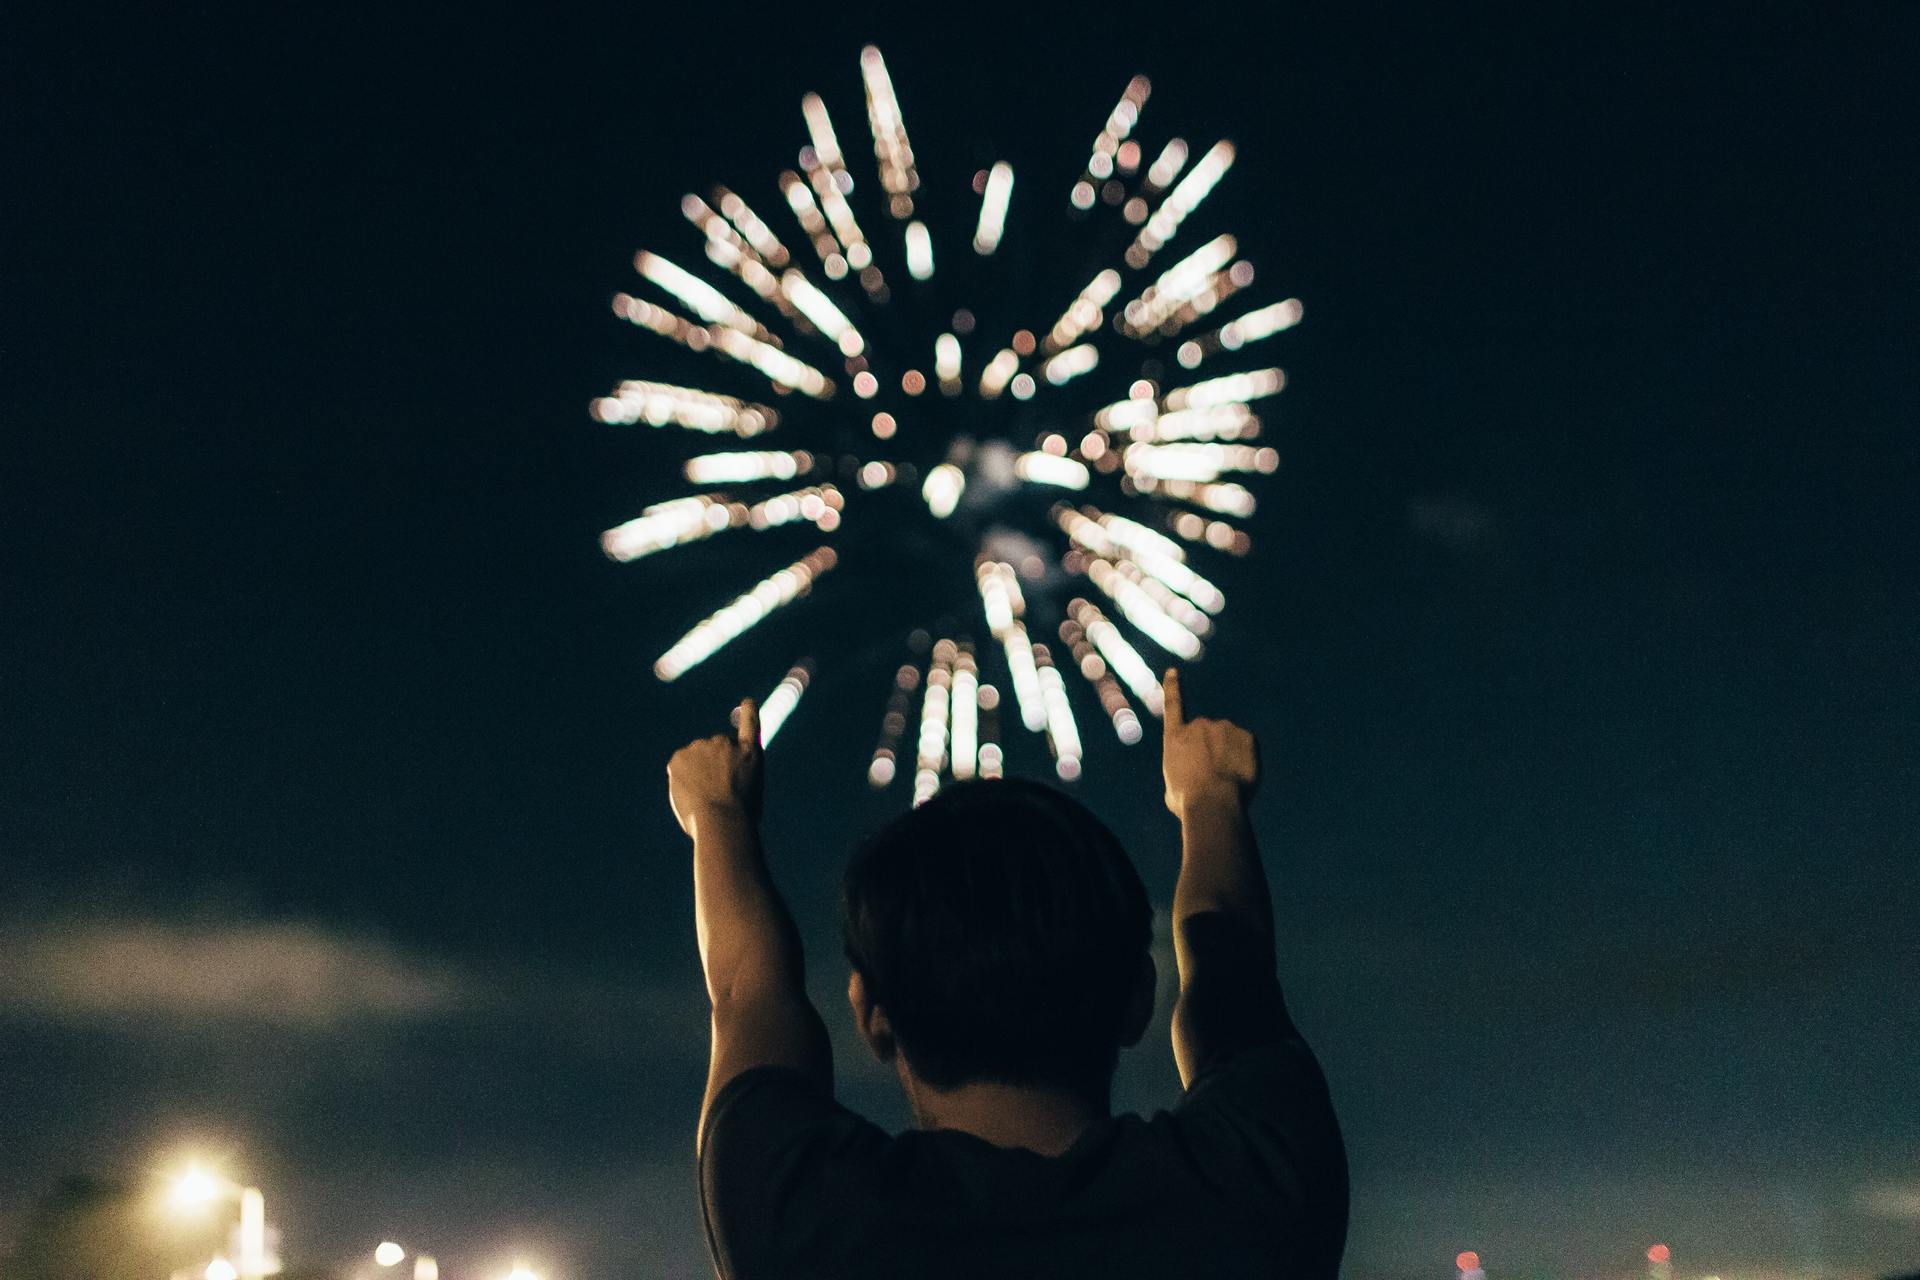 man reaching up to the skyies with fireworks in the distance